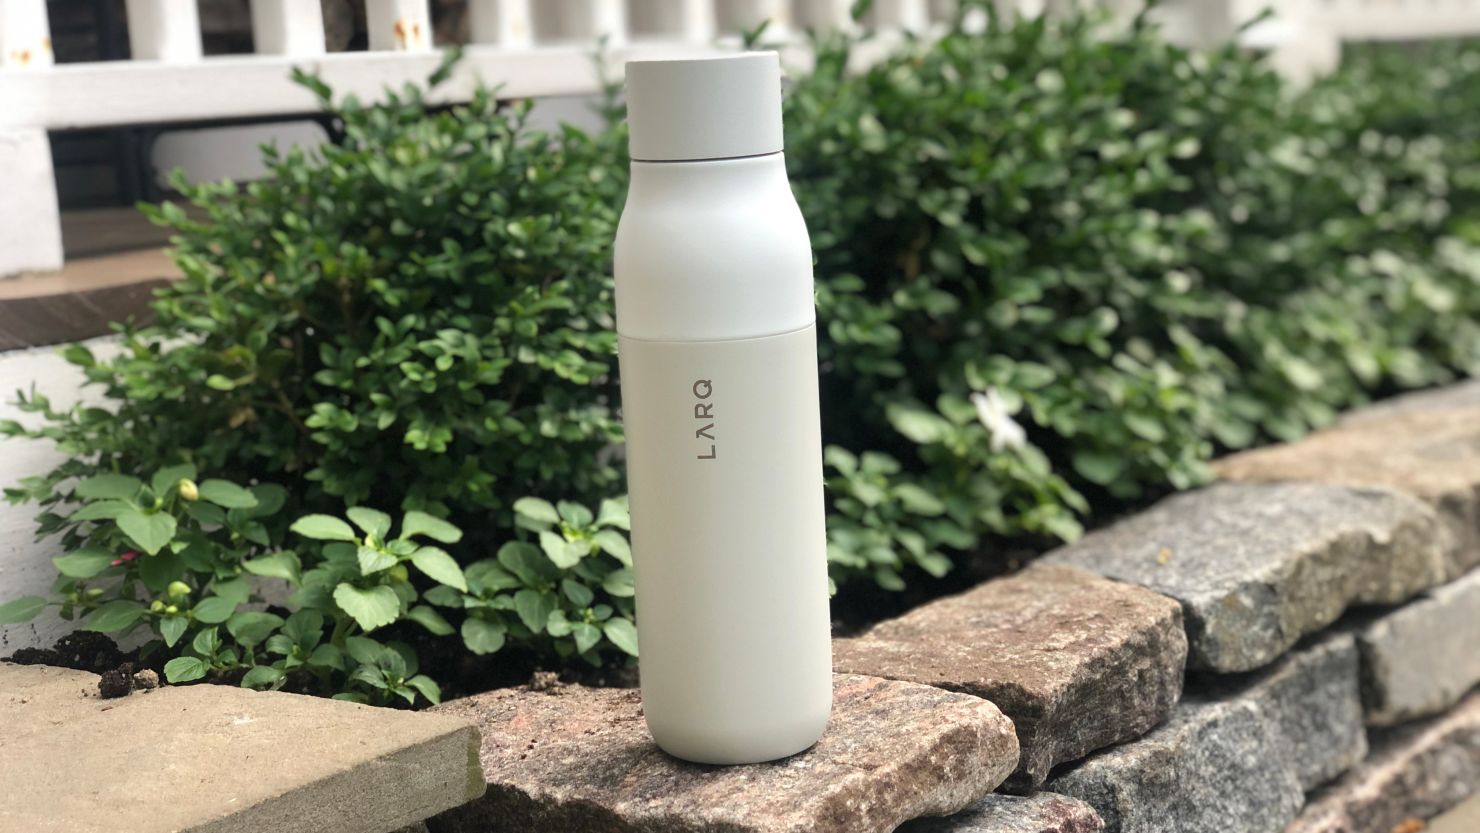 One Bottle Review: Now You Can Have Your Water and Drink it too